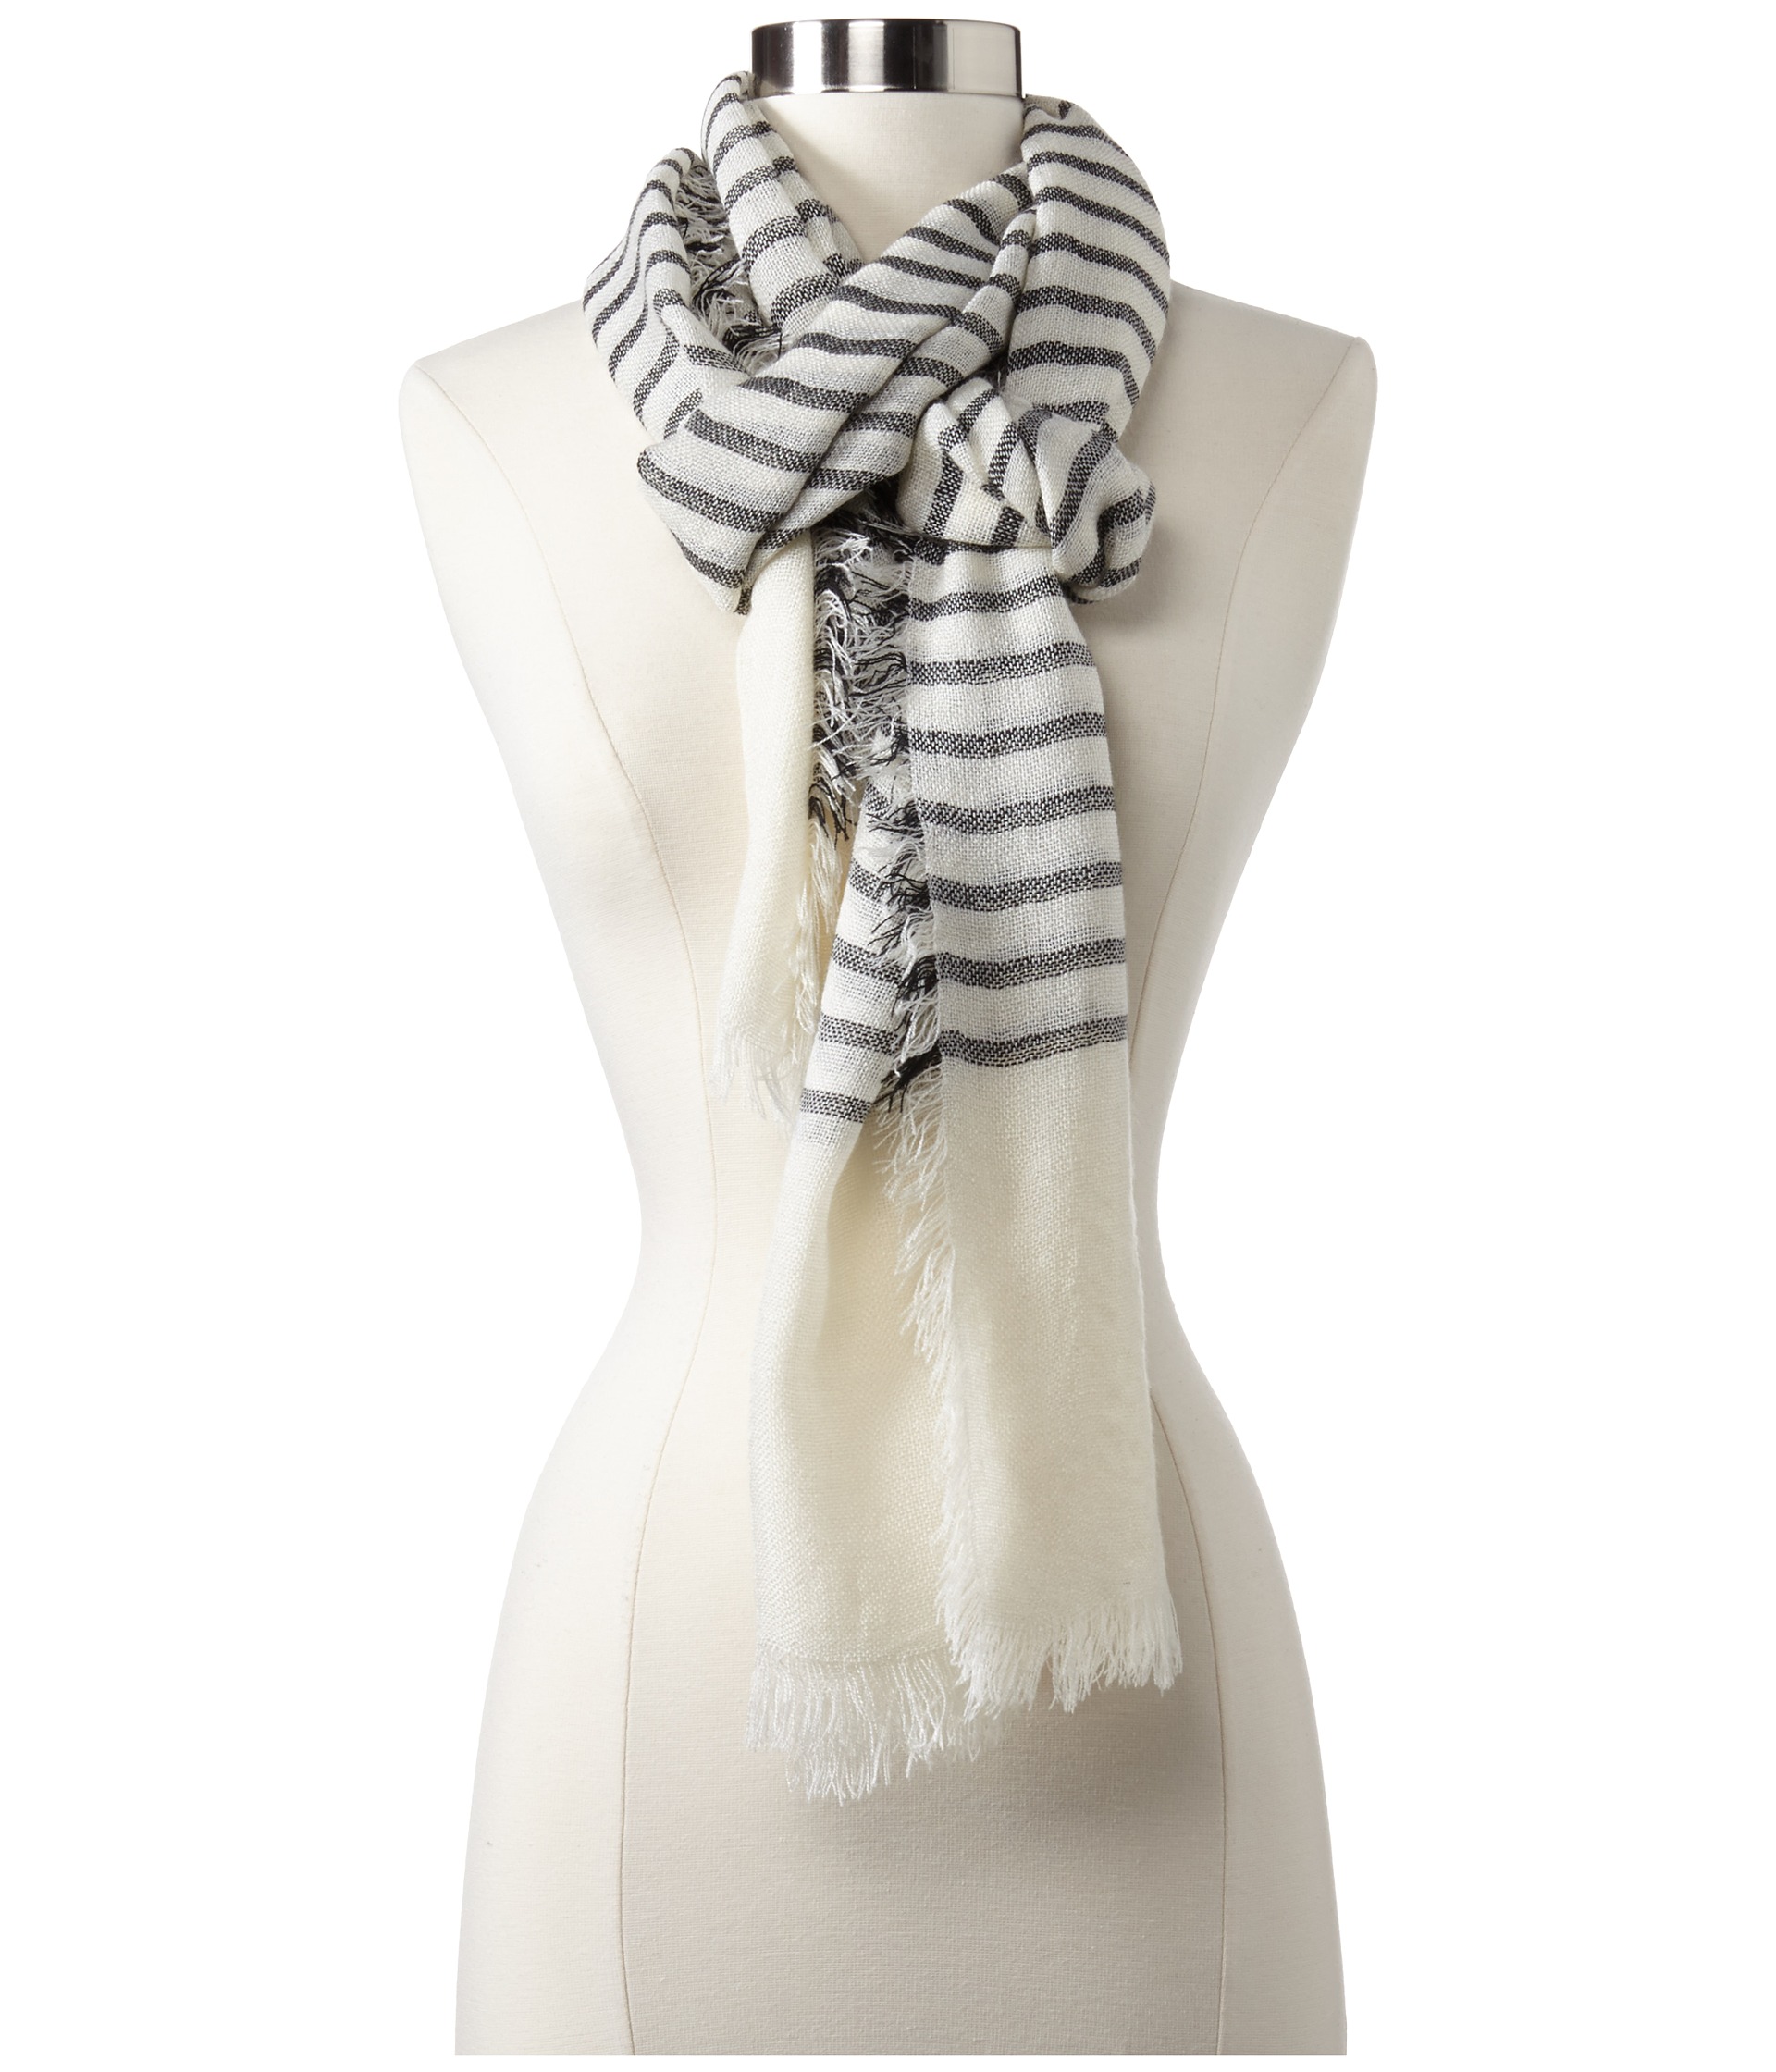 Steve Madden Jail Stripe Scarf | Shipped Free at Zappos